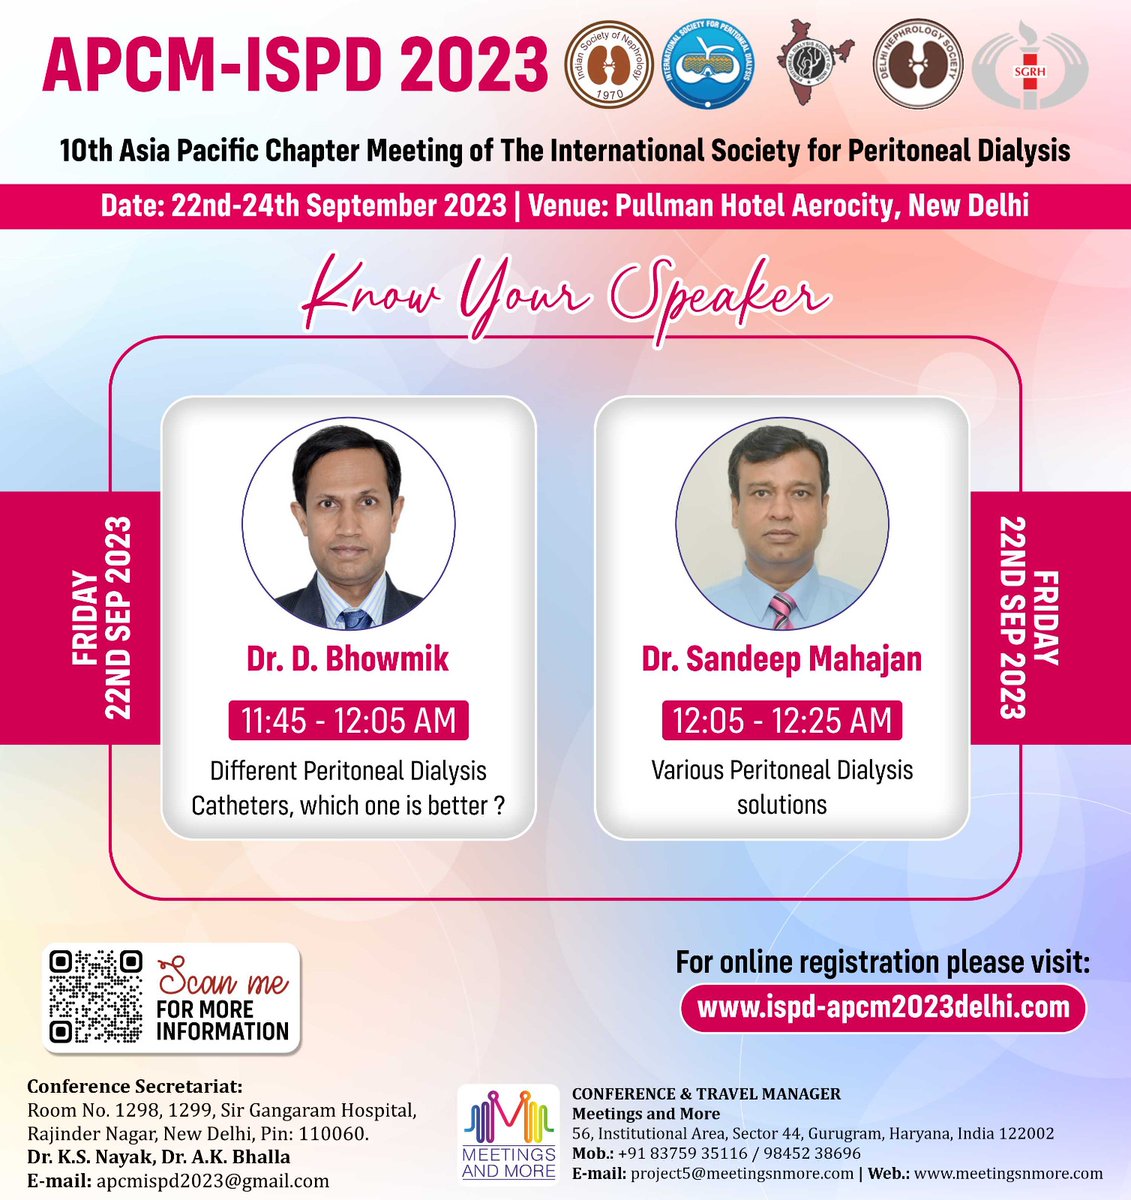 Dear Colleagues,   

Inviting you to the upcoming international conference APCM ISPD 2023.     

For more information: ispd-apcm2023delhi.com
For registration: ispd-apcm2023delhi.com/registration.p……

#ispd23 #conference #kidney #nephrology #peritonealdialysis